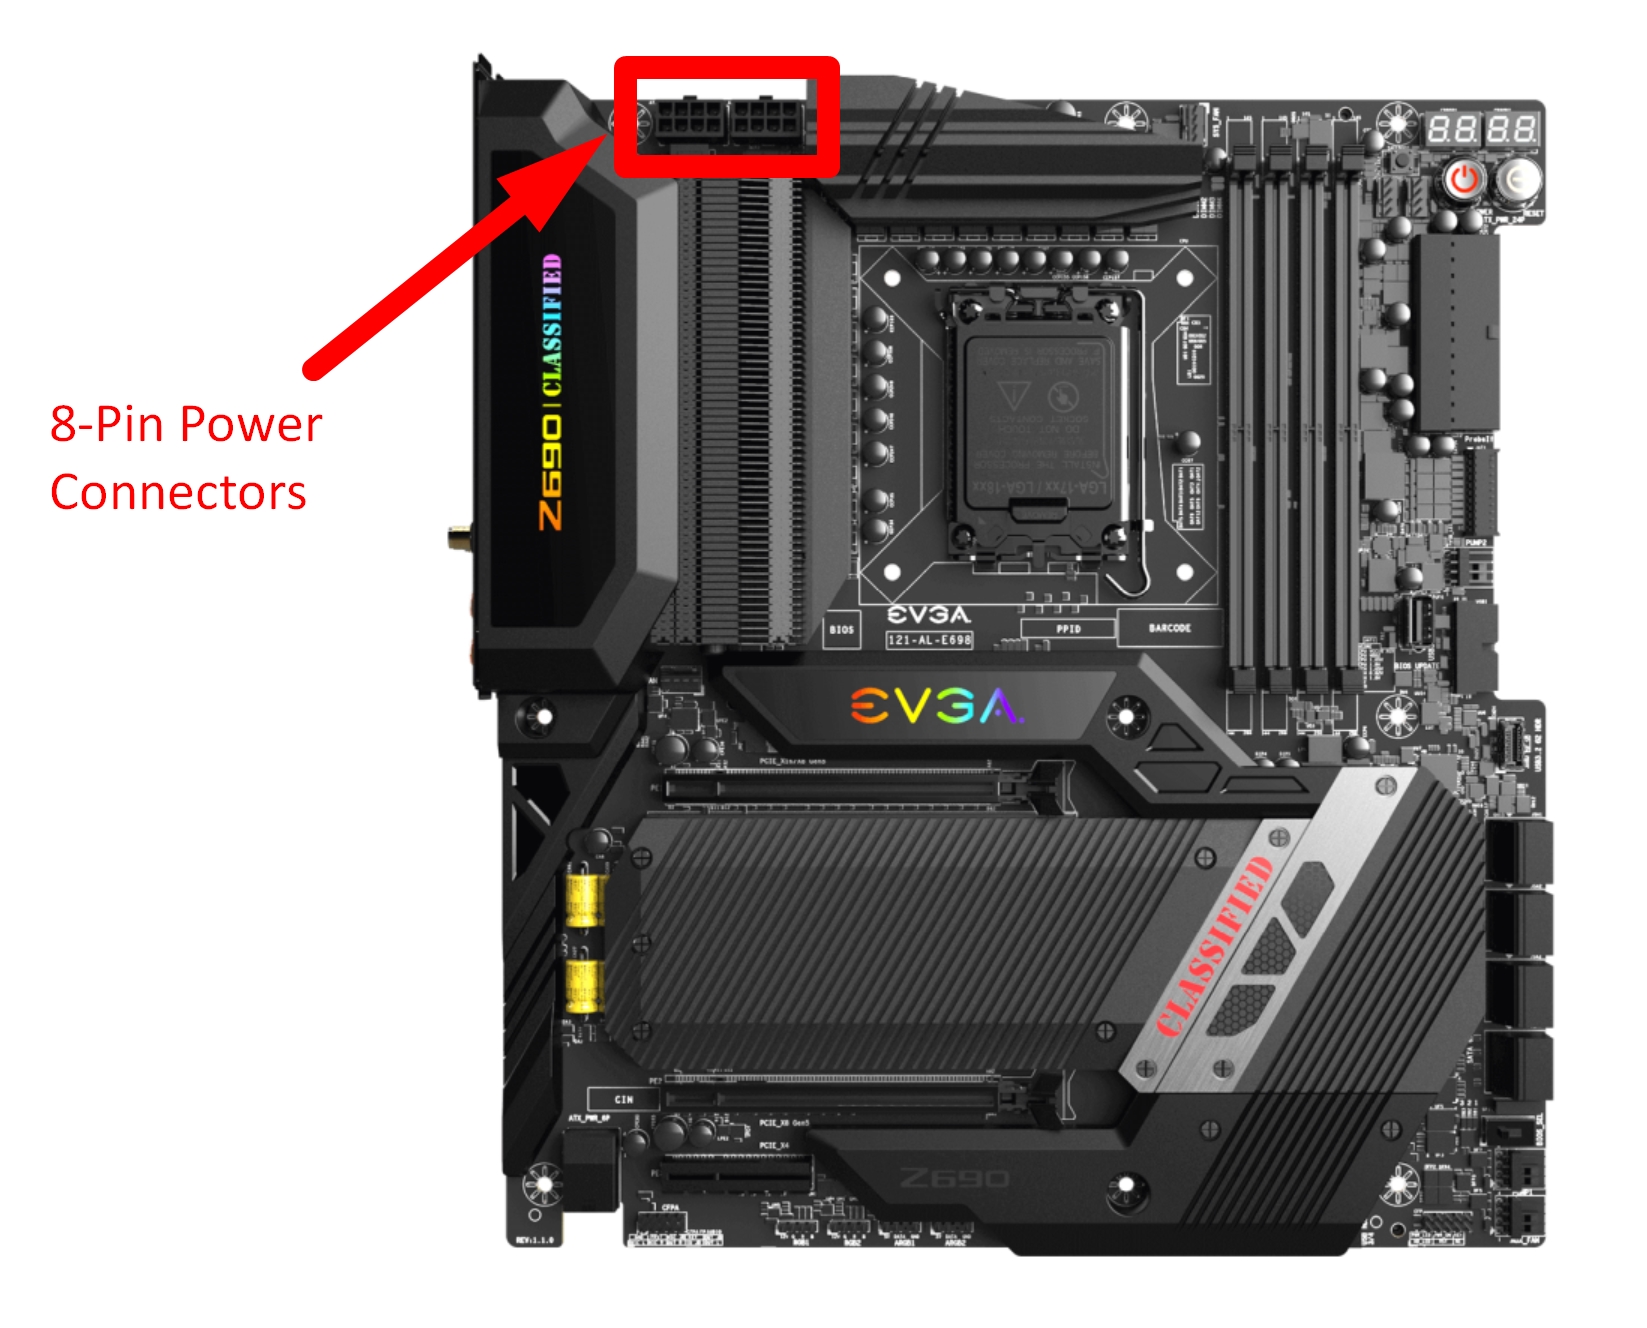 8-Pin CPU Power Connector(s) on Motherboard